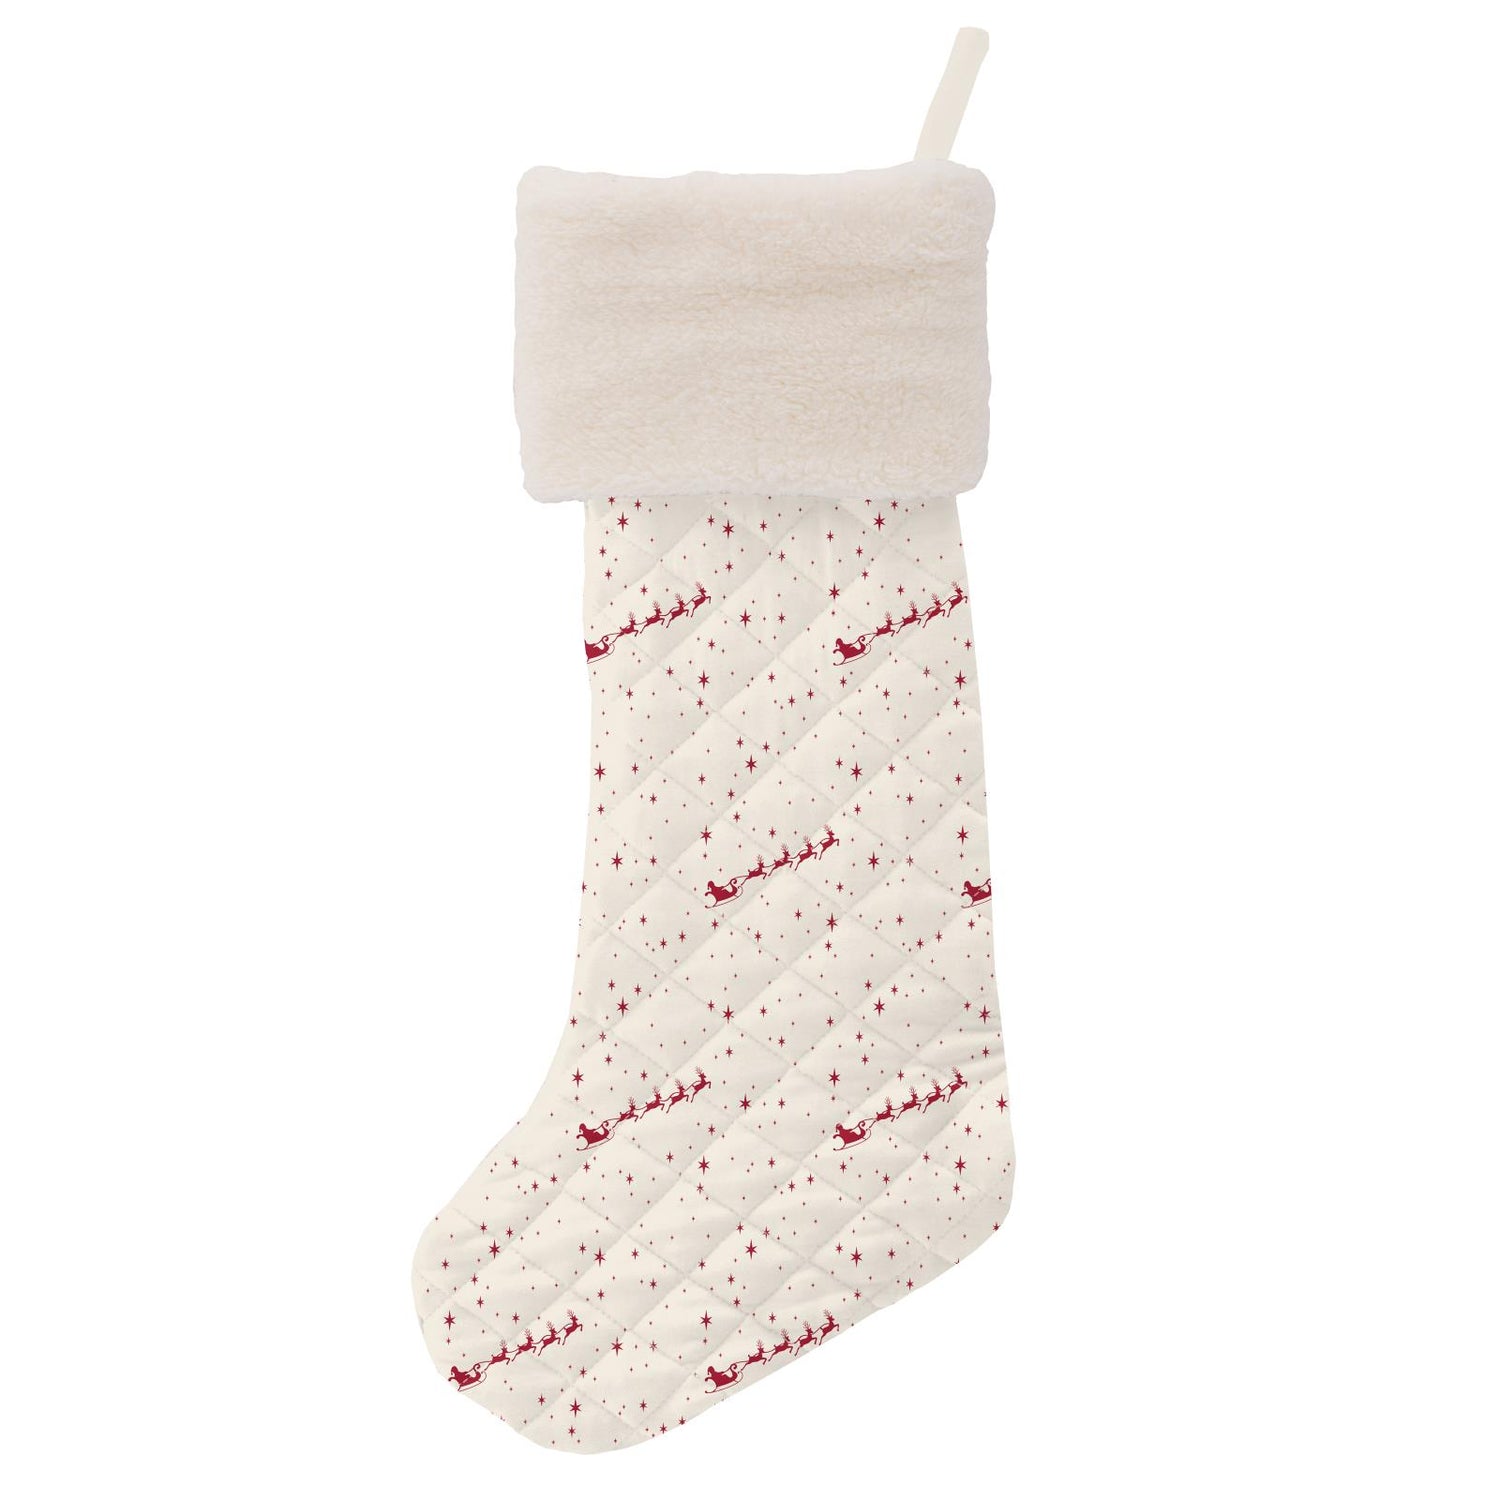 Quilted Stocking in Natural Flying Santa/Crimson Candy Cane Stripe